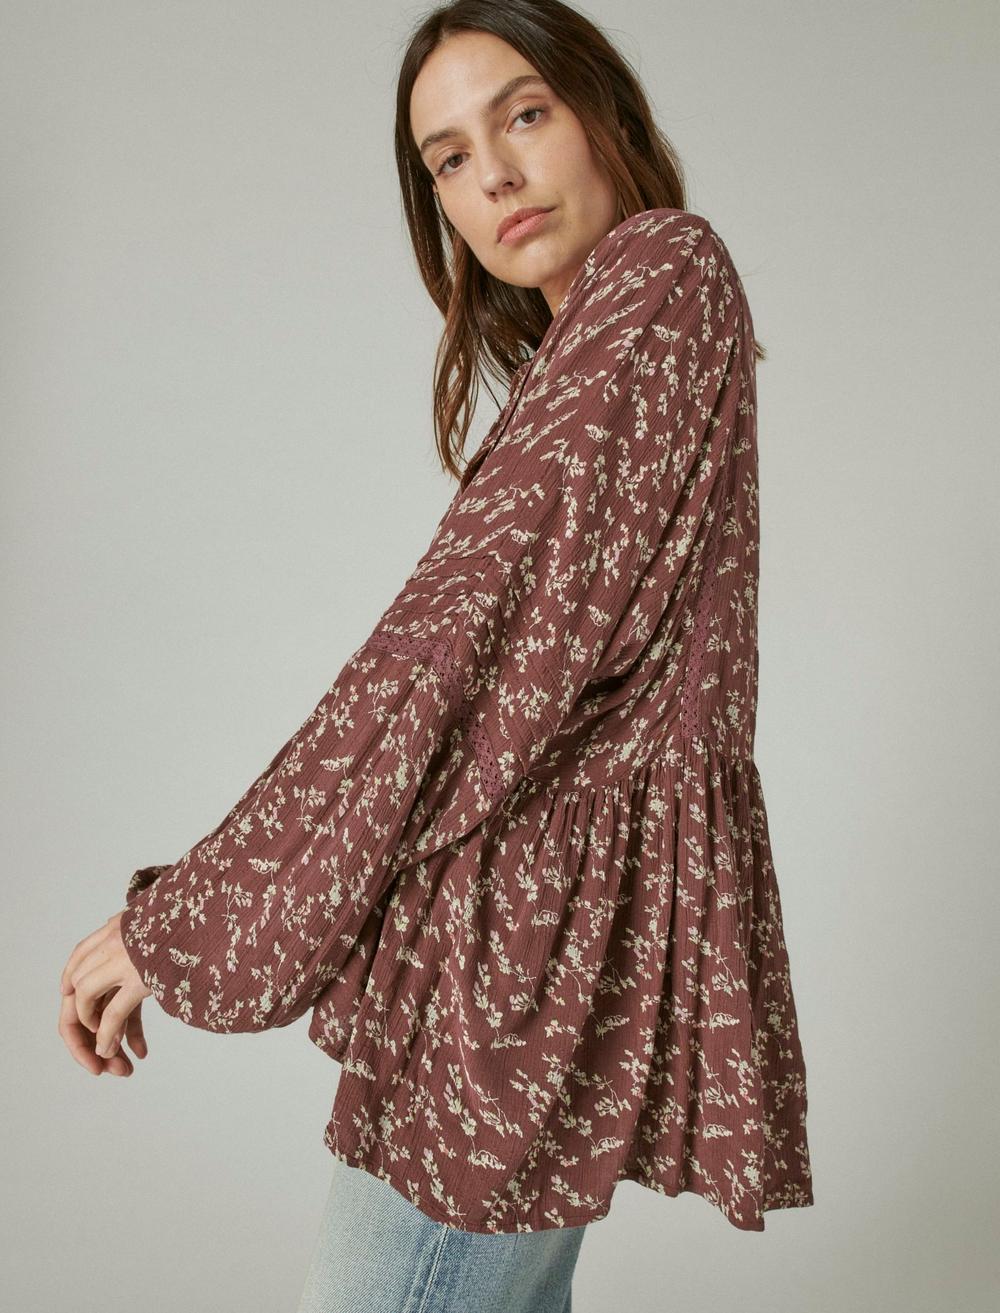 PRINTED LONG SLEEVE POPOVER TOP, image 3